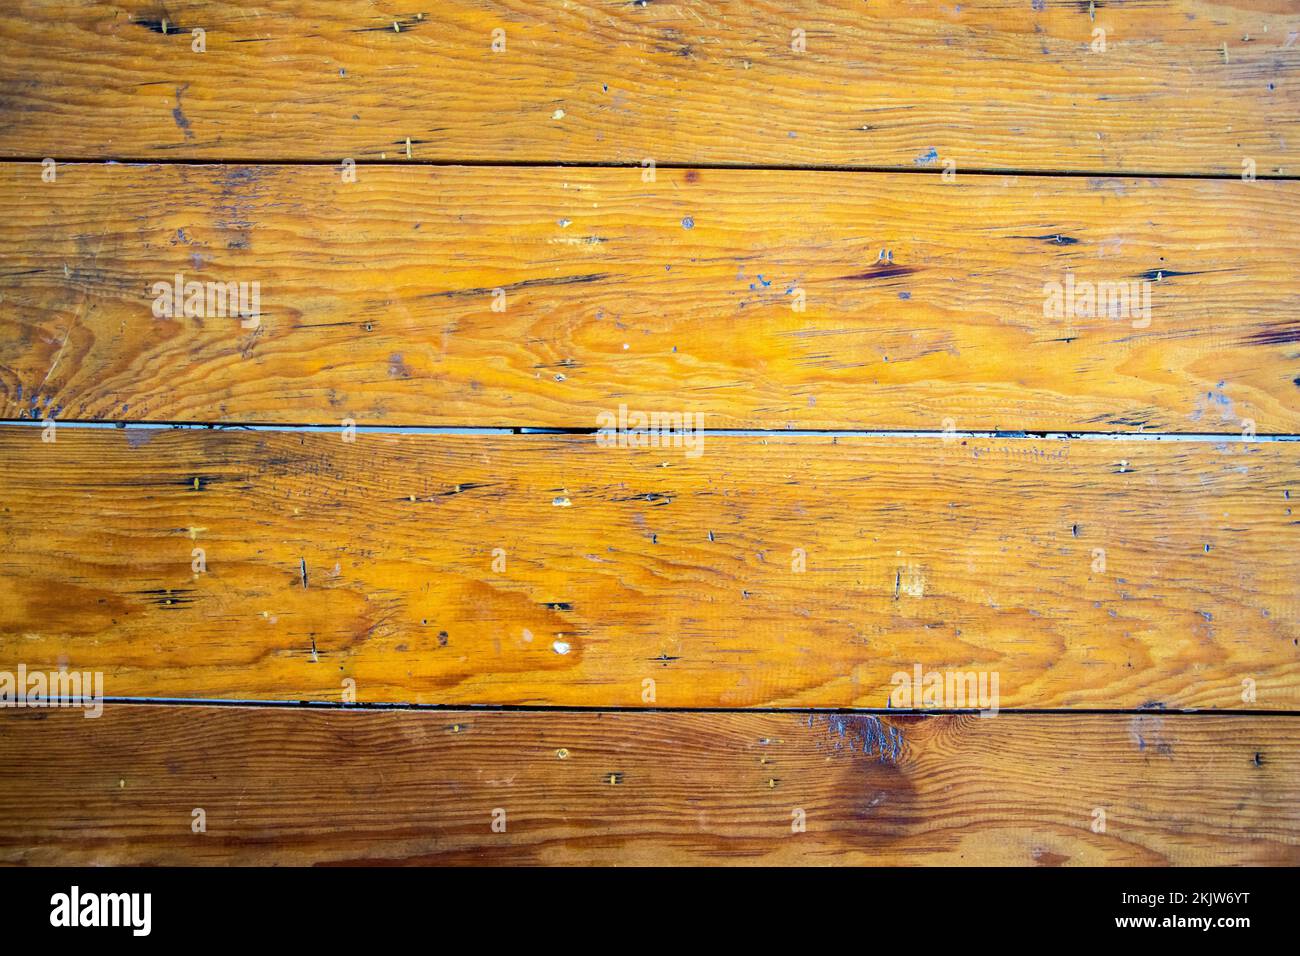 Rough and Rugged Wooden Table Top Stock Photo